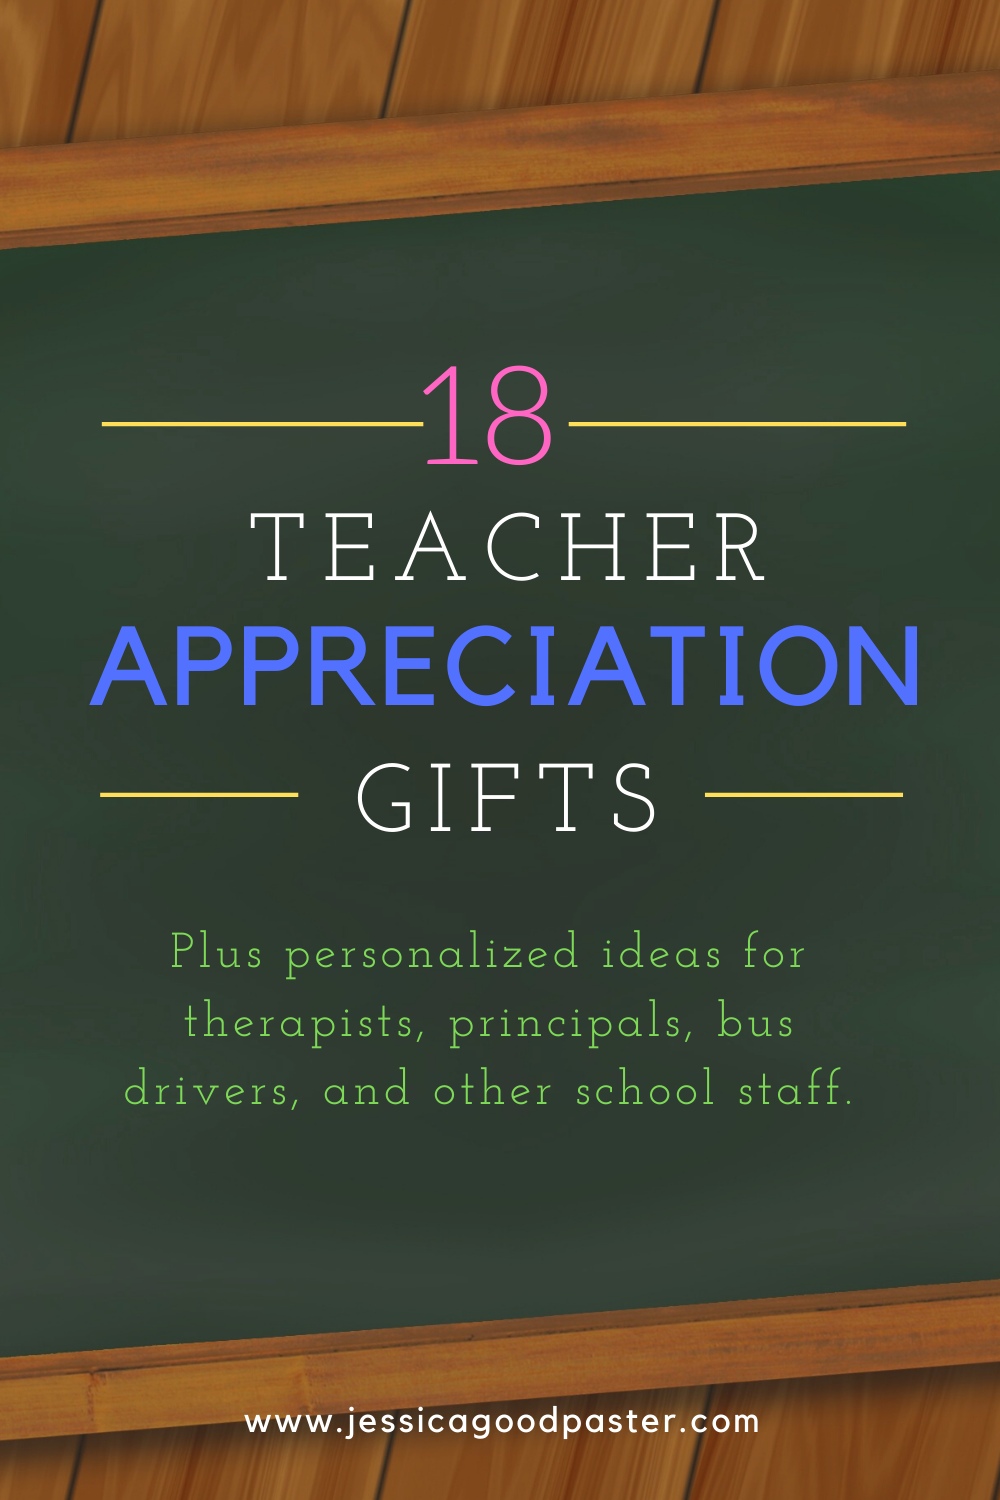 18 Personalized Teacher Appreciation Gifts Plus Ideas for Other School Staff | Great gift ideas for teachers, SLPs, OTs, PTs, counselors, bus drivers, principals, custodians, and other school staff. Find personalized teacher appreciation gifts for every budget. Perfect for teacher appreciation week, end of the year, or just saying thanks. #teachergifts #teacherappreciation #giftideas #teachergiftideas #personalizedgifts #school 